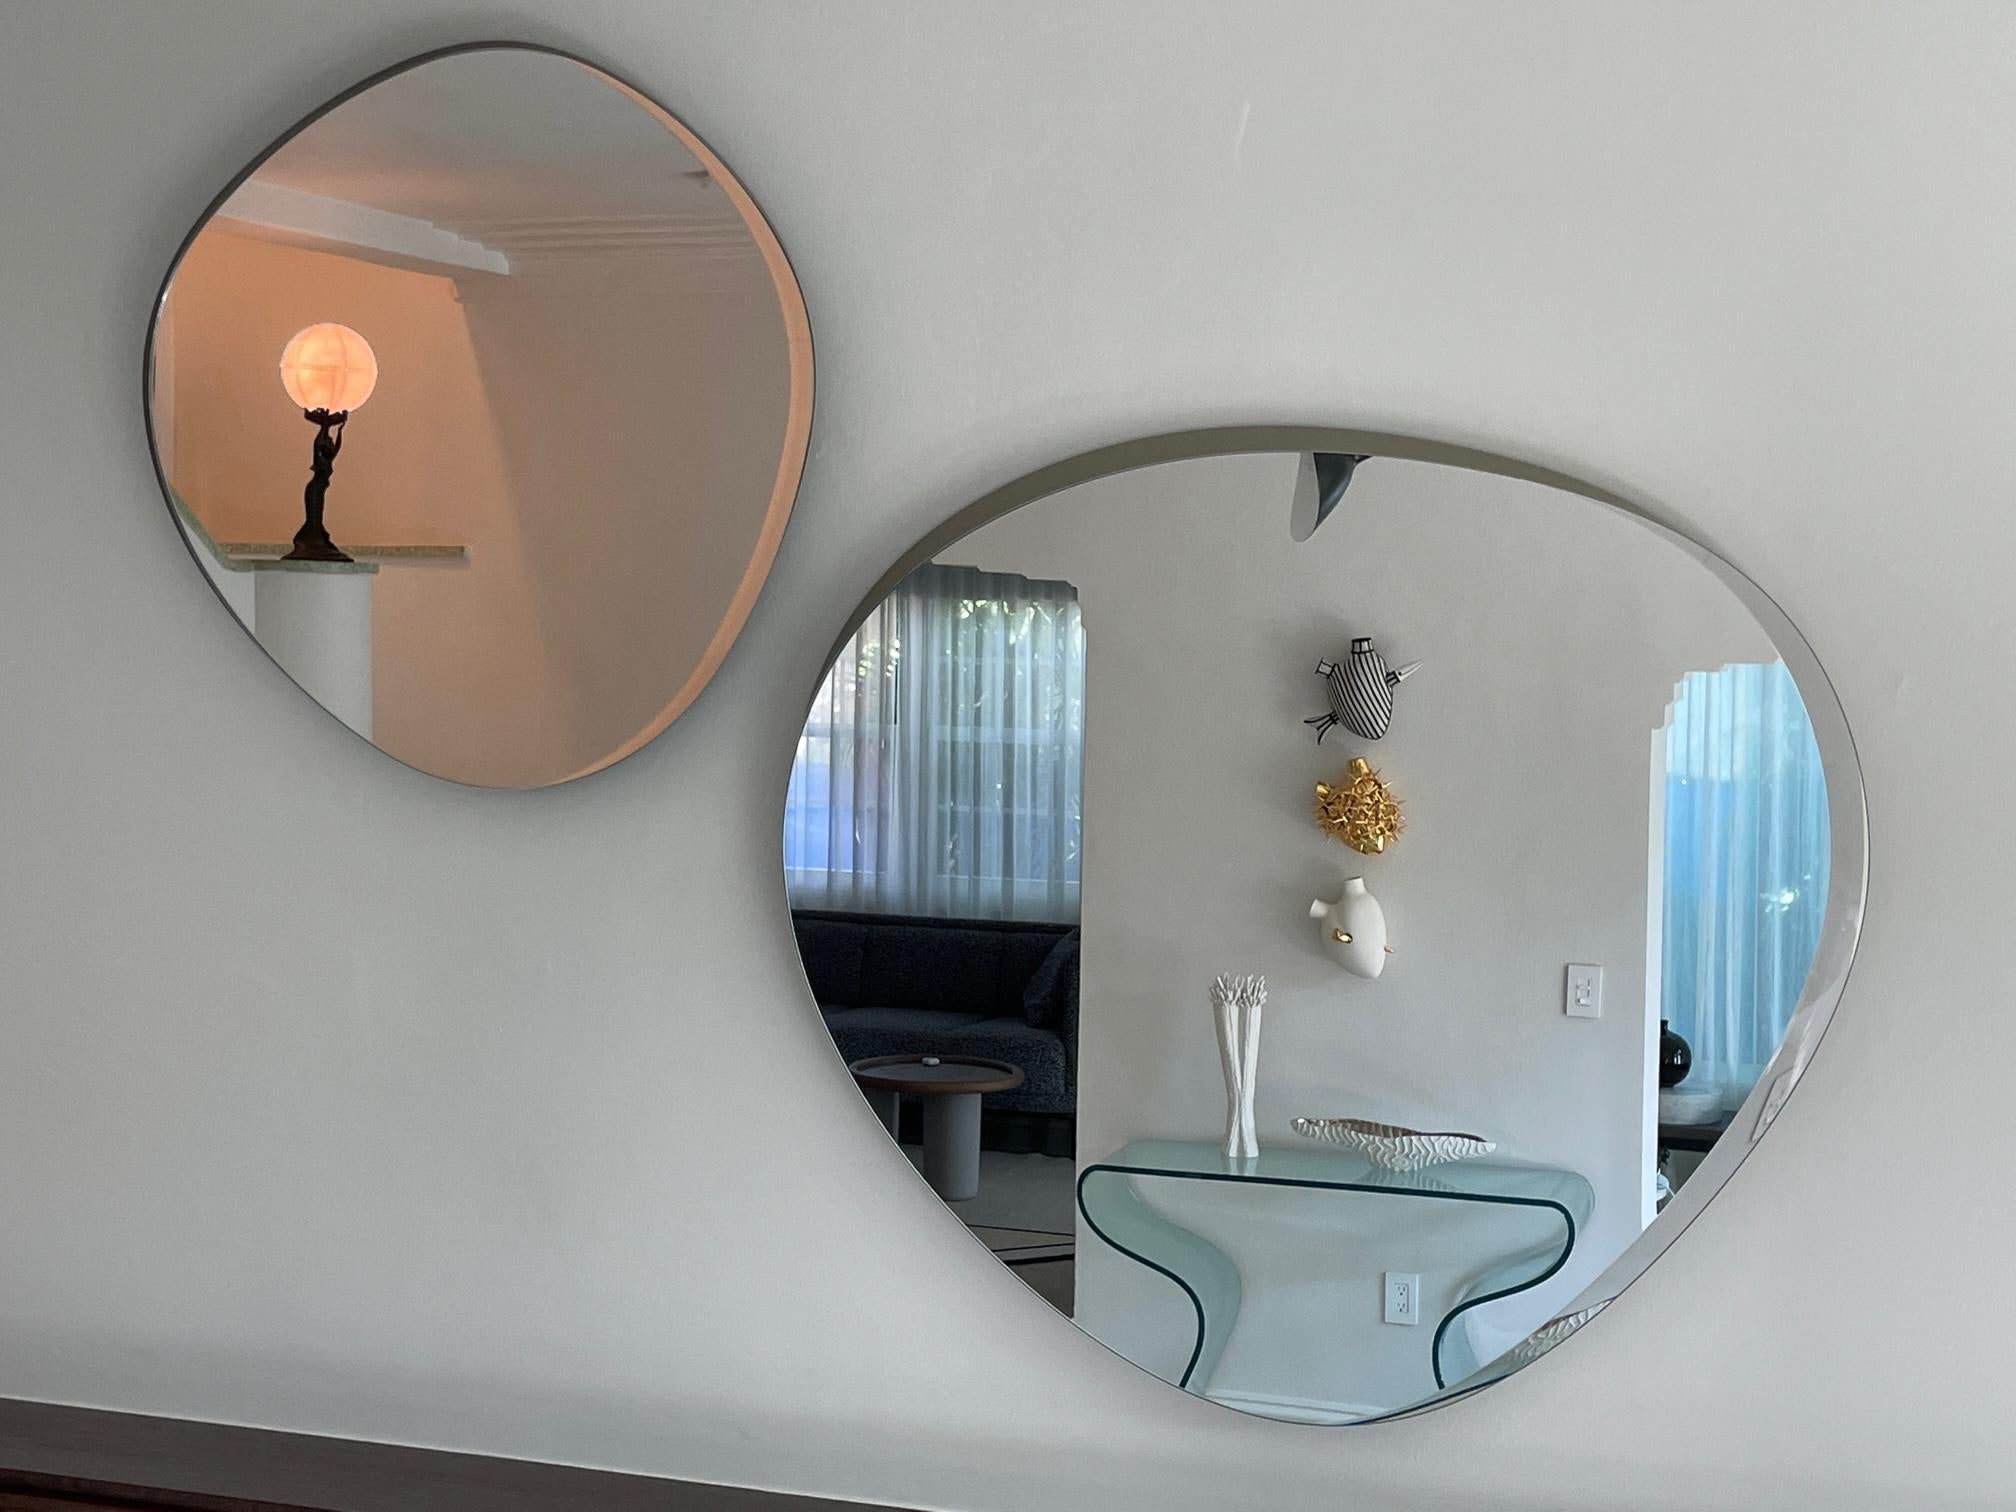 Italian Gallotti & Radice Set of Two Zeiss Mirrors Designed by Luca Nichetto in STOCK